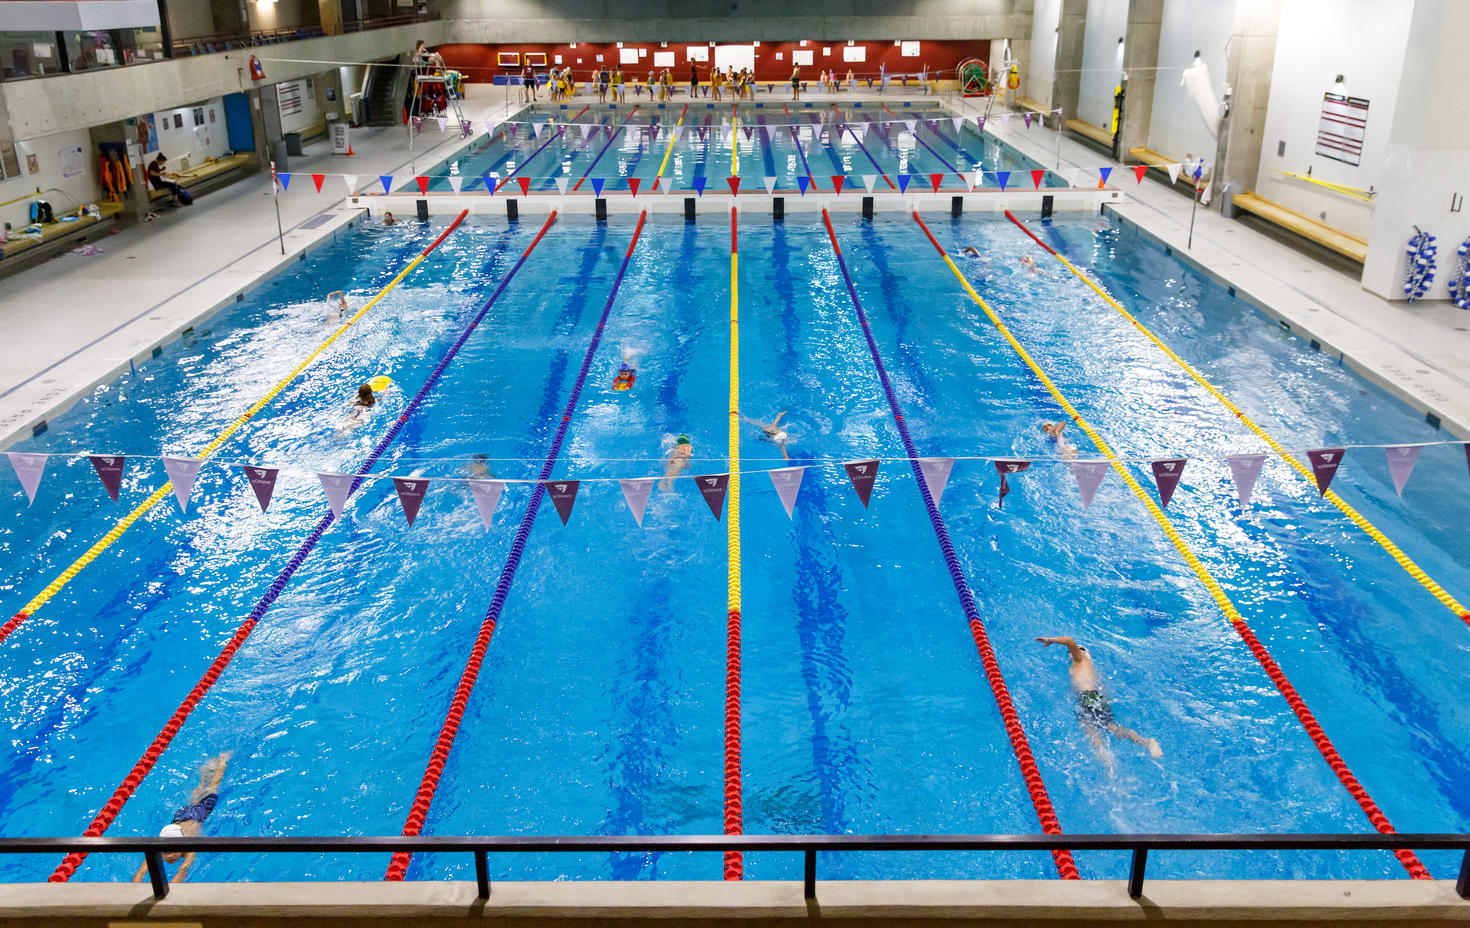 https://www.uottawa.ca/campus-life/sites/g/files/bhrskd281/files/styles/max_width_l_1470px/public/2021-11/Swimming-5.jpg?itok=2x25eE-6